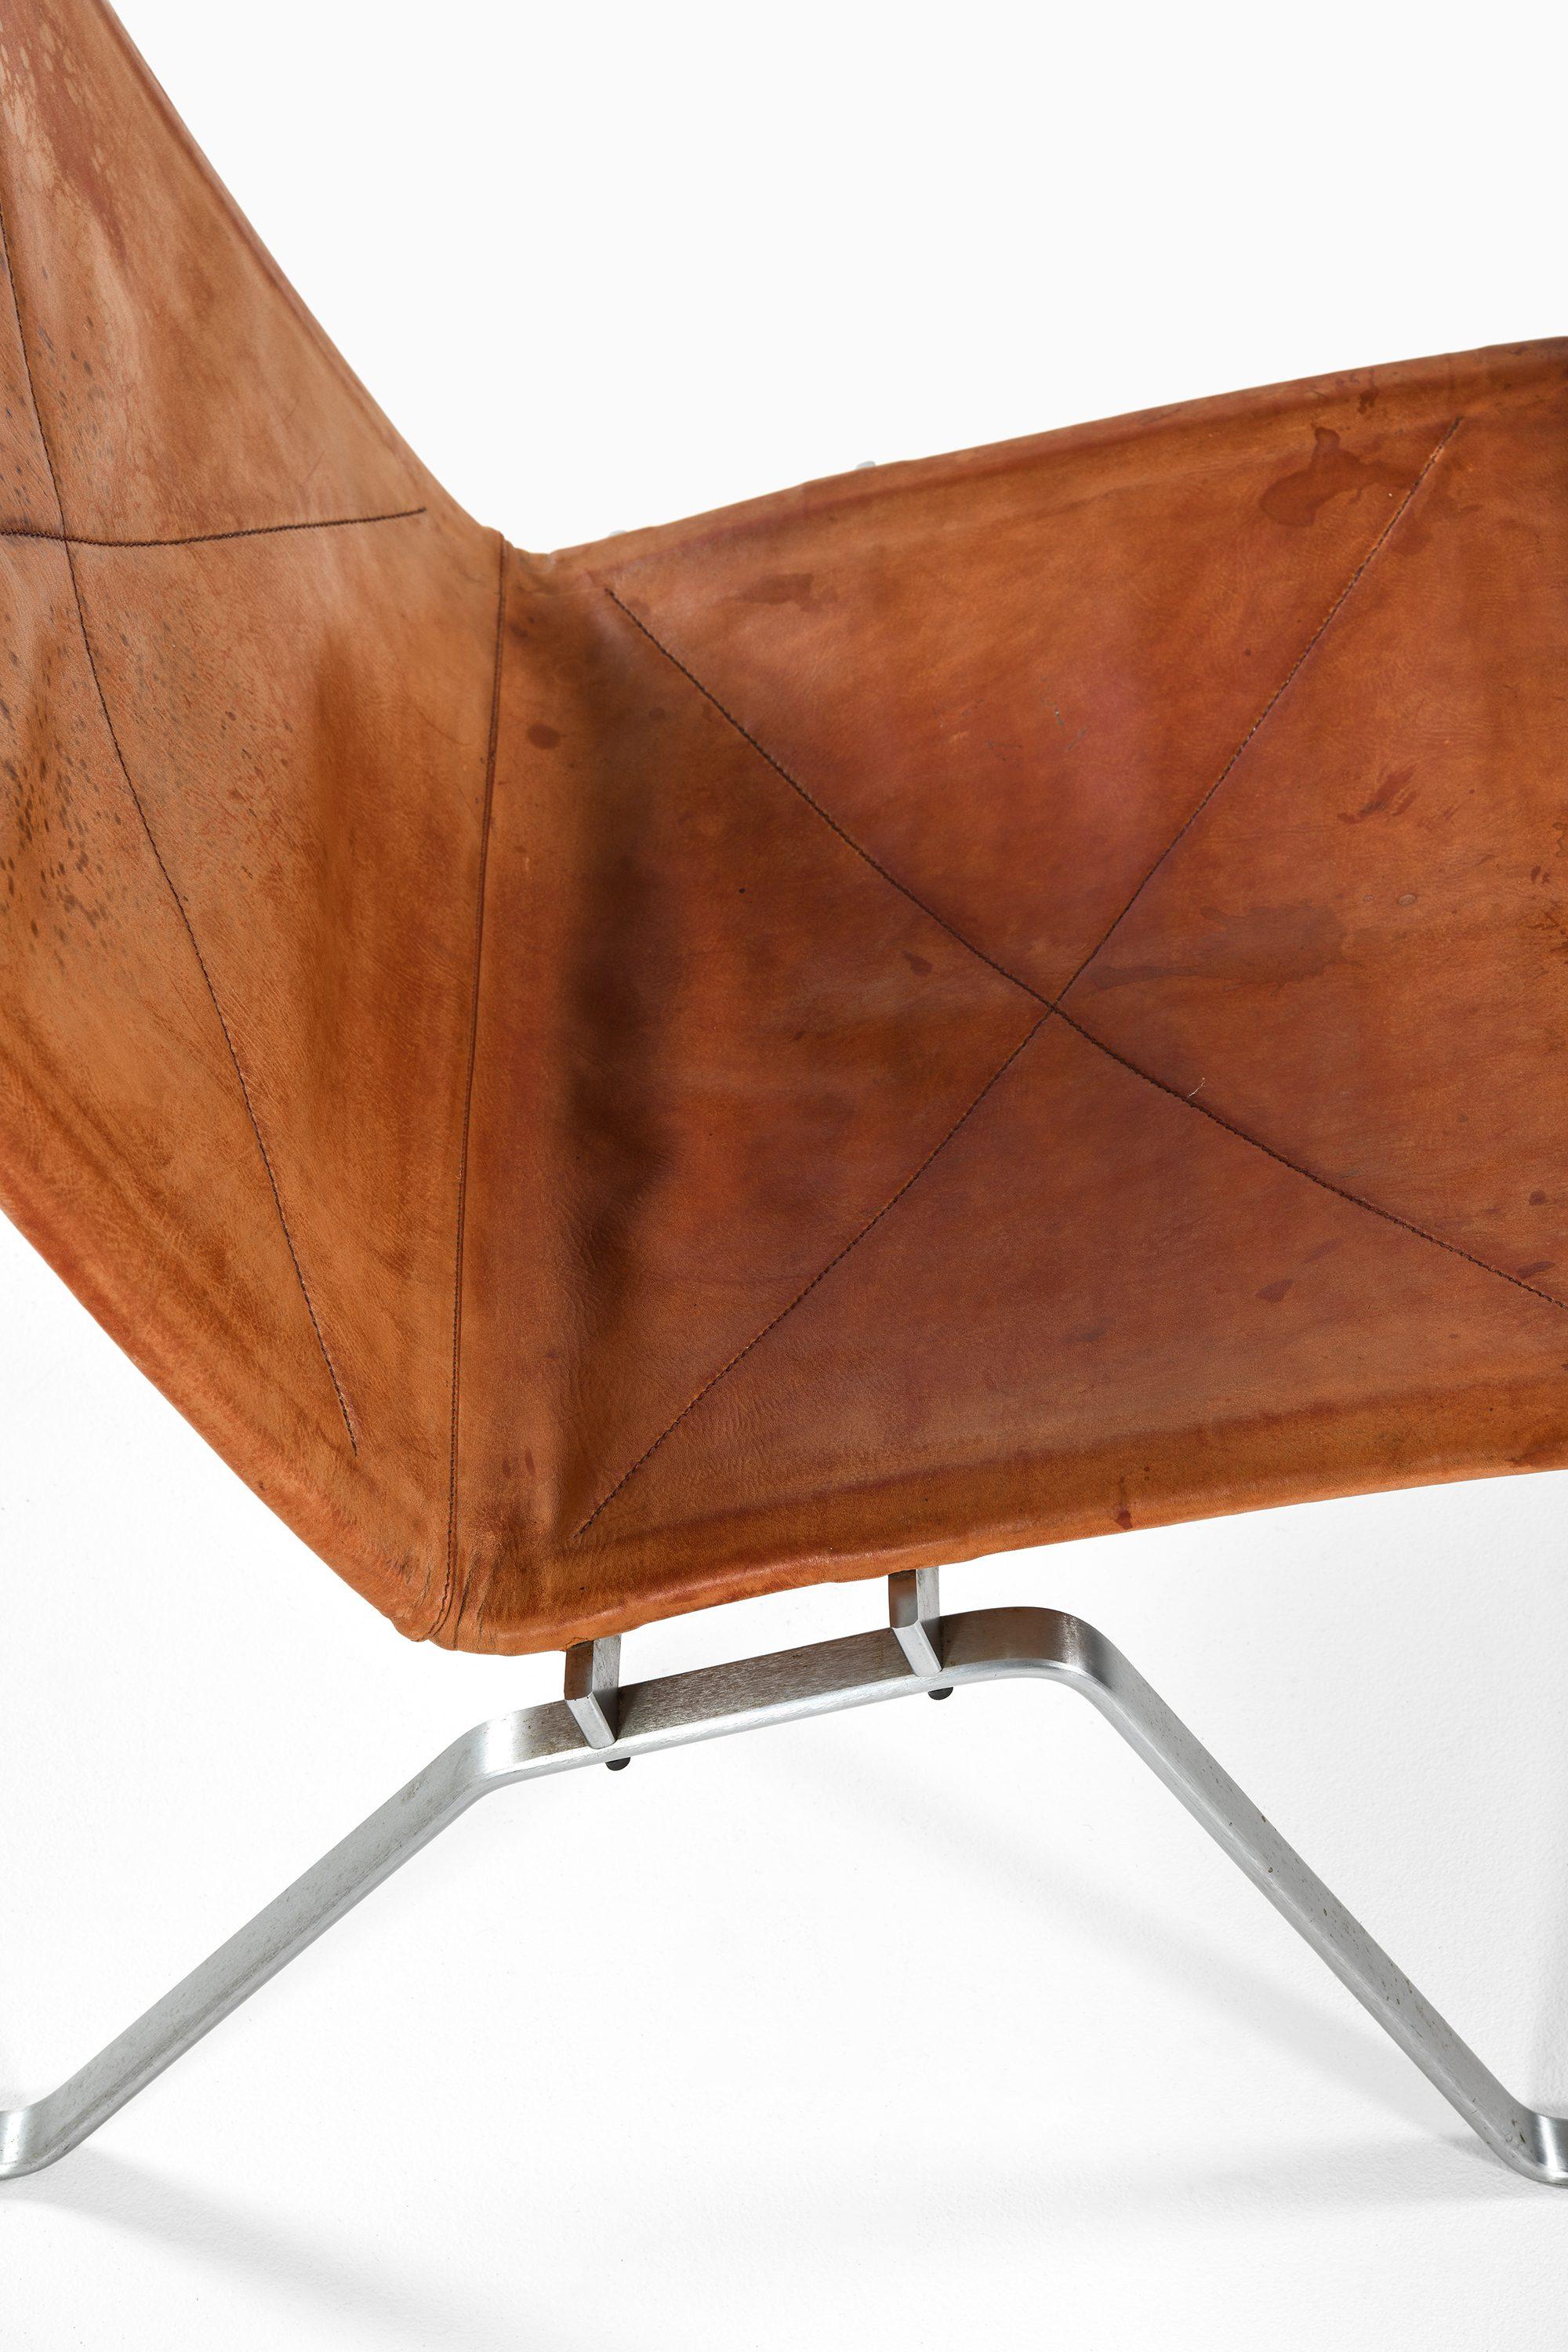 Danish Pair of Easy Chairs in Original Leather and Steel by Poul Kjærholm, 1950s For Sale